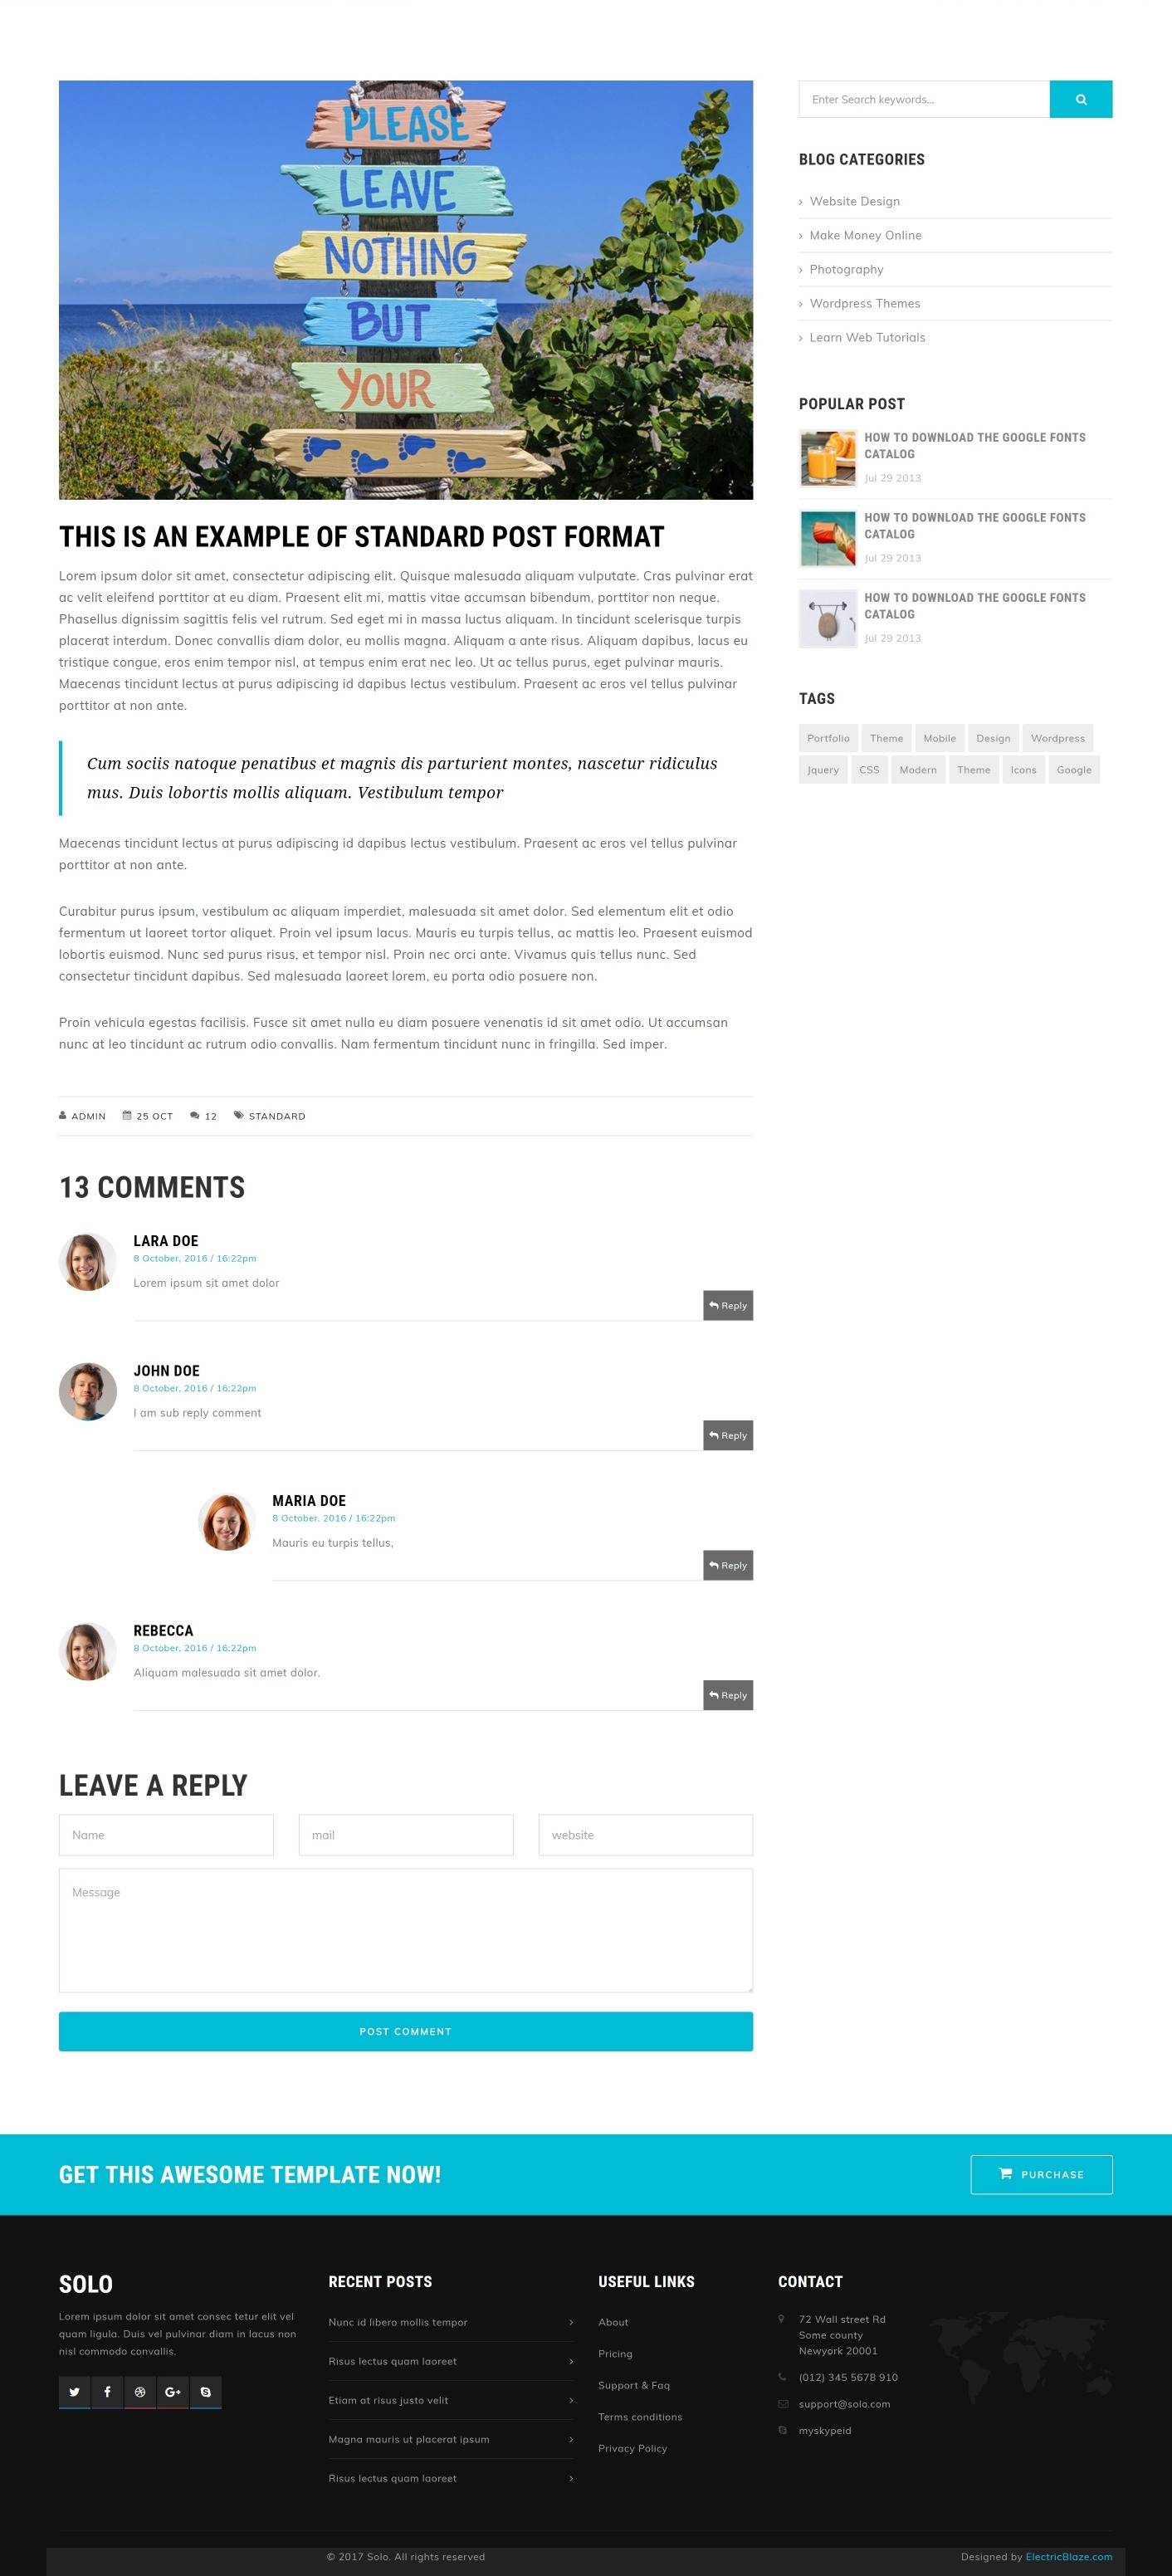 Solo - 103+ Pages HTML Bootstrap Template - 35